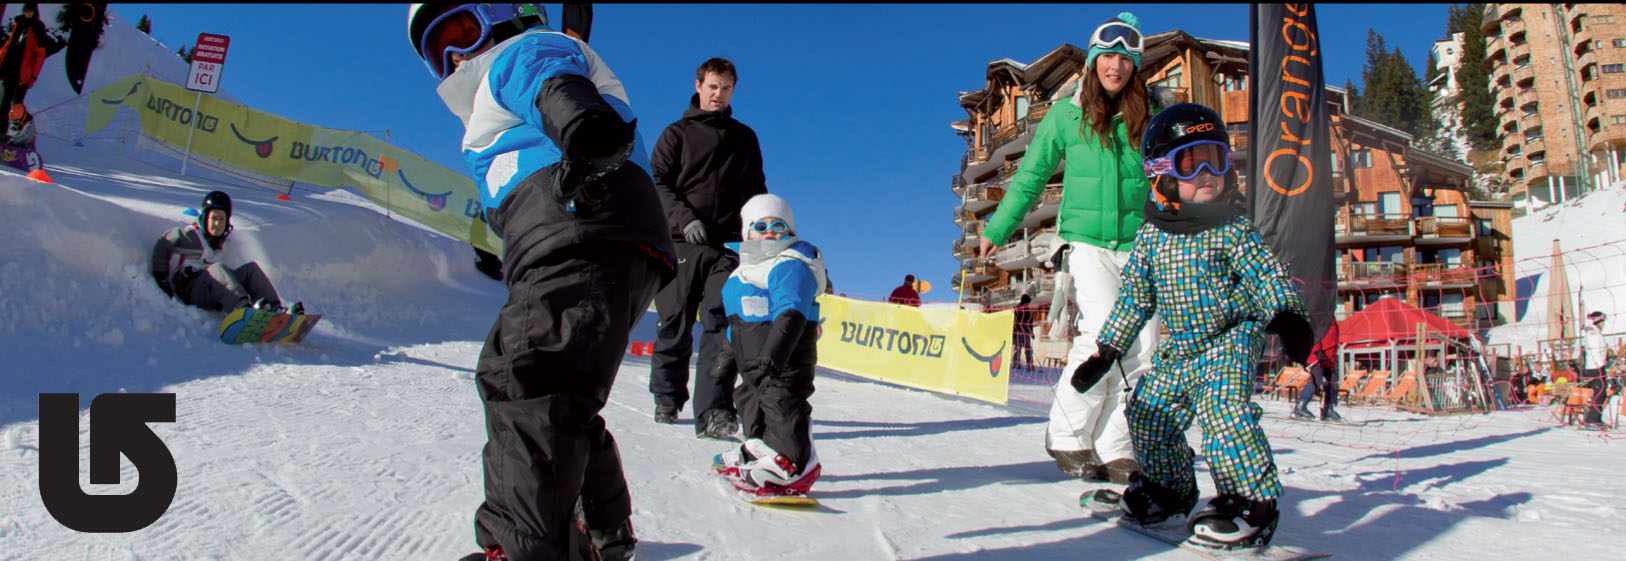 kids snowboard lessons france age